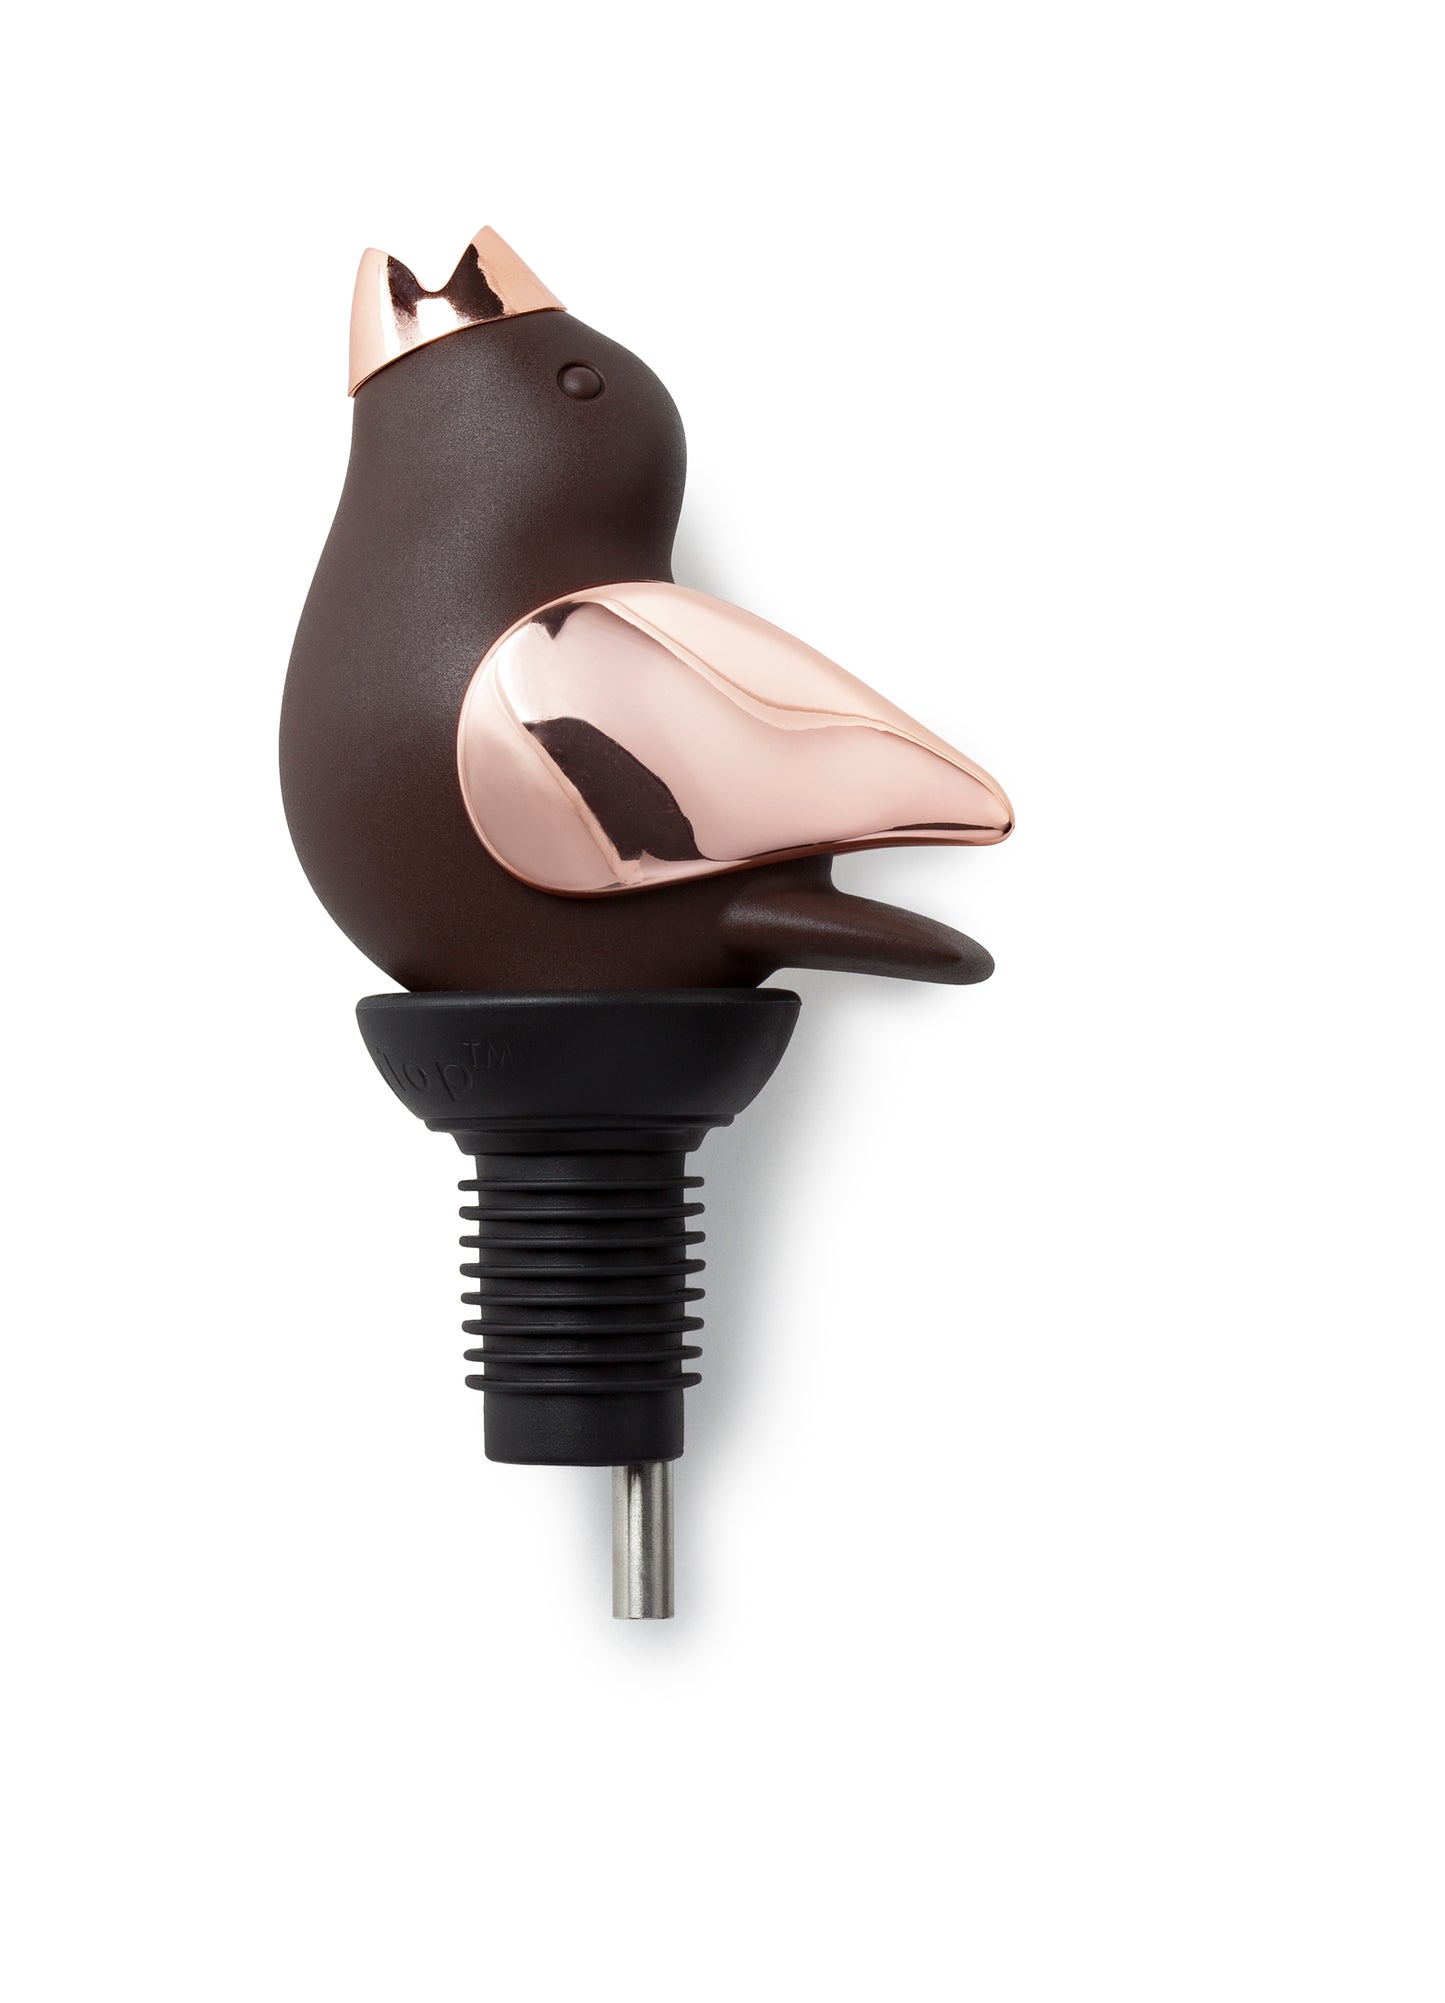 Chirpy Top Wine Pourer - Copper Bown